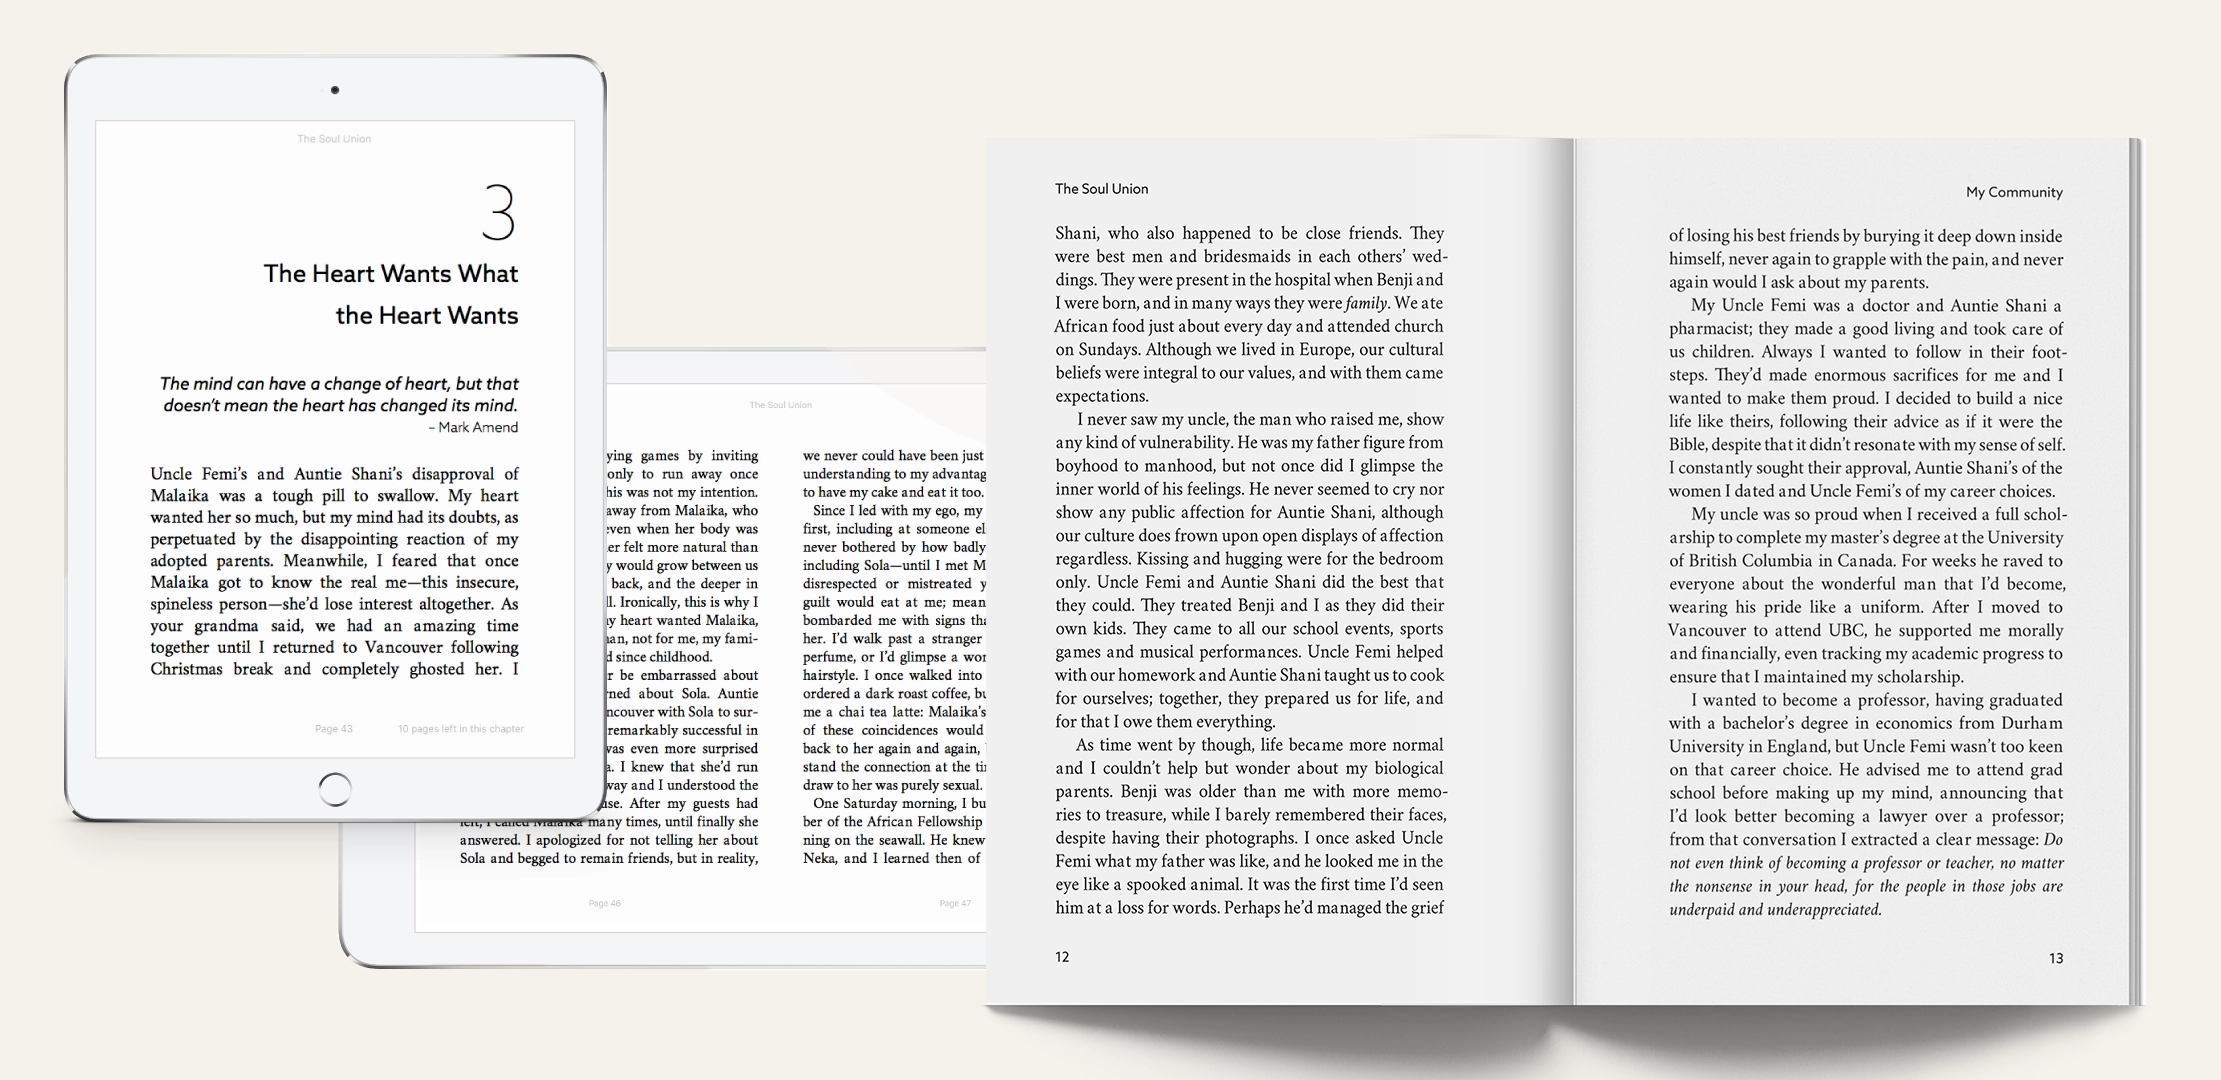 an example of a reflowable ebook file showing how it reflows when the device is turned